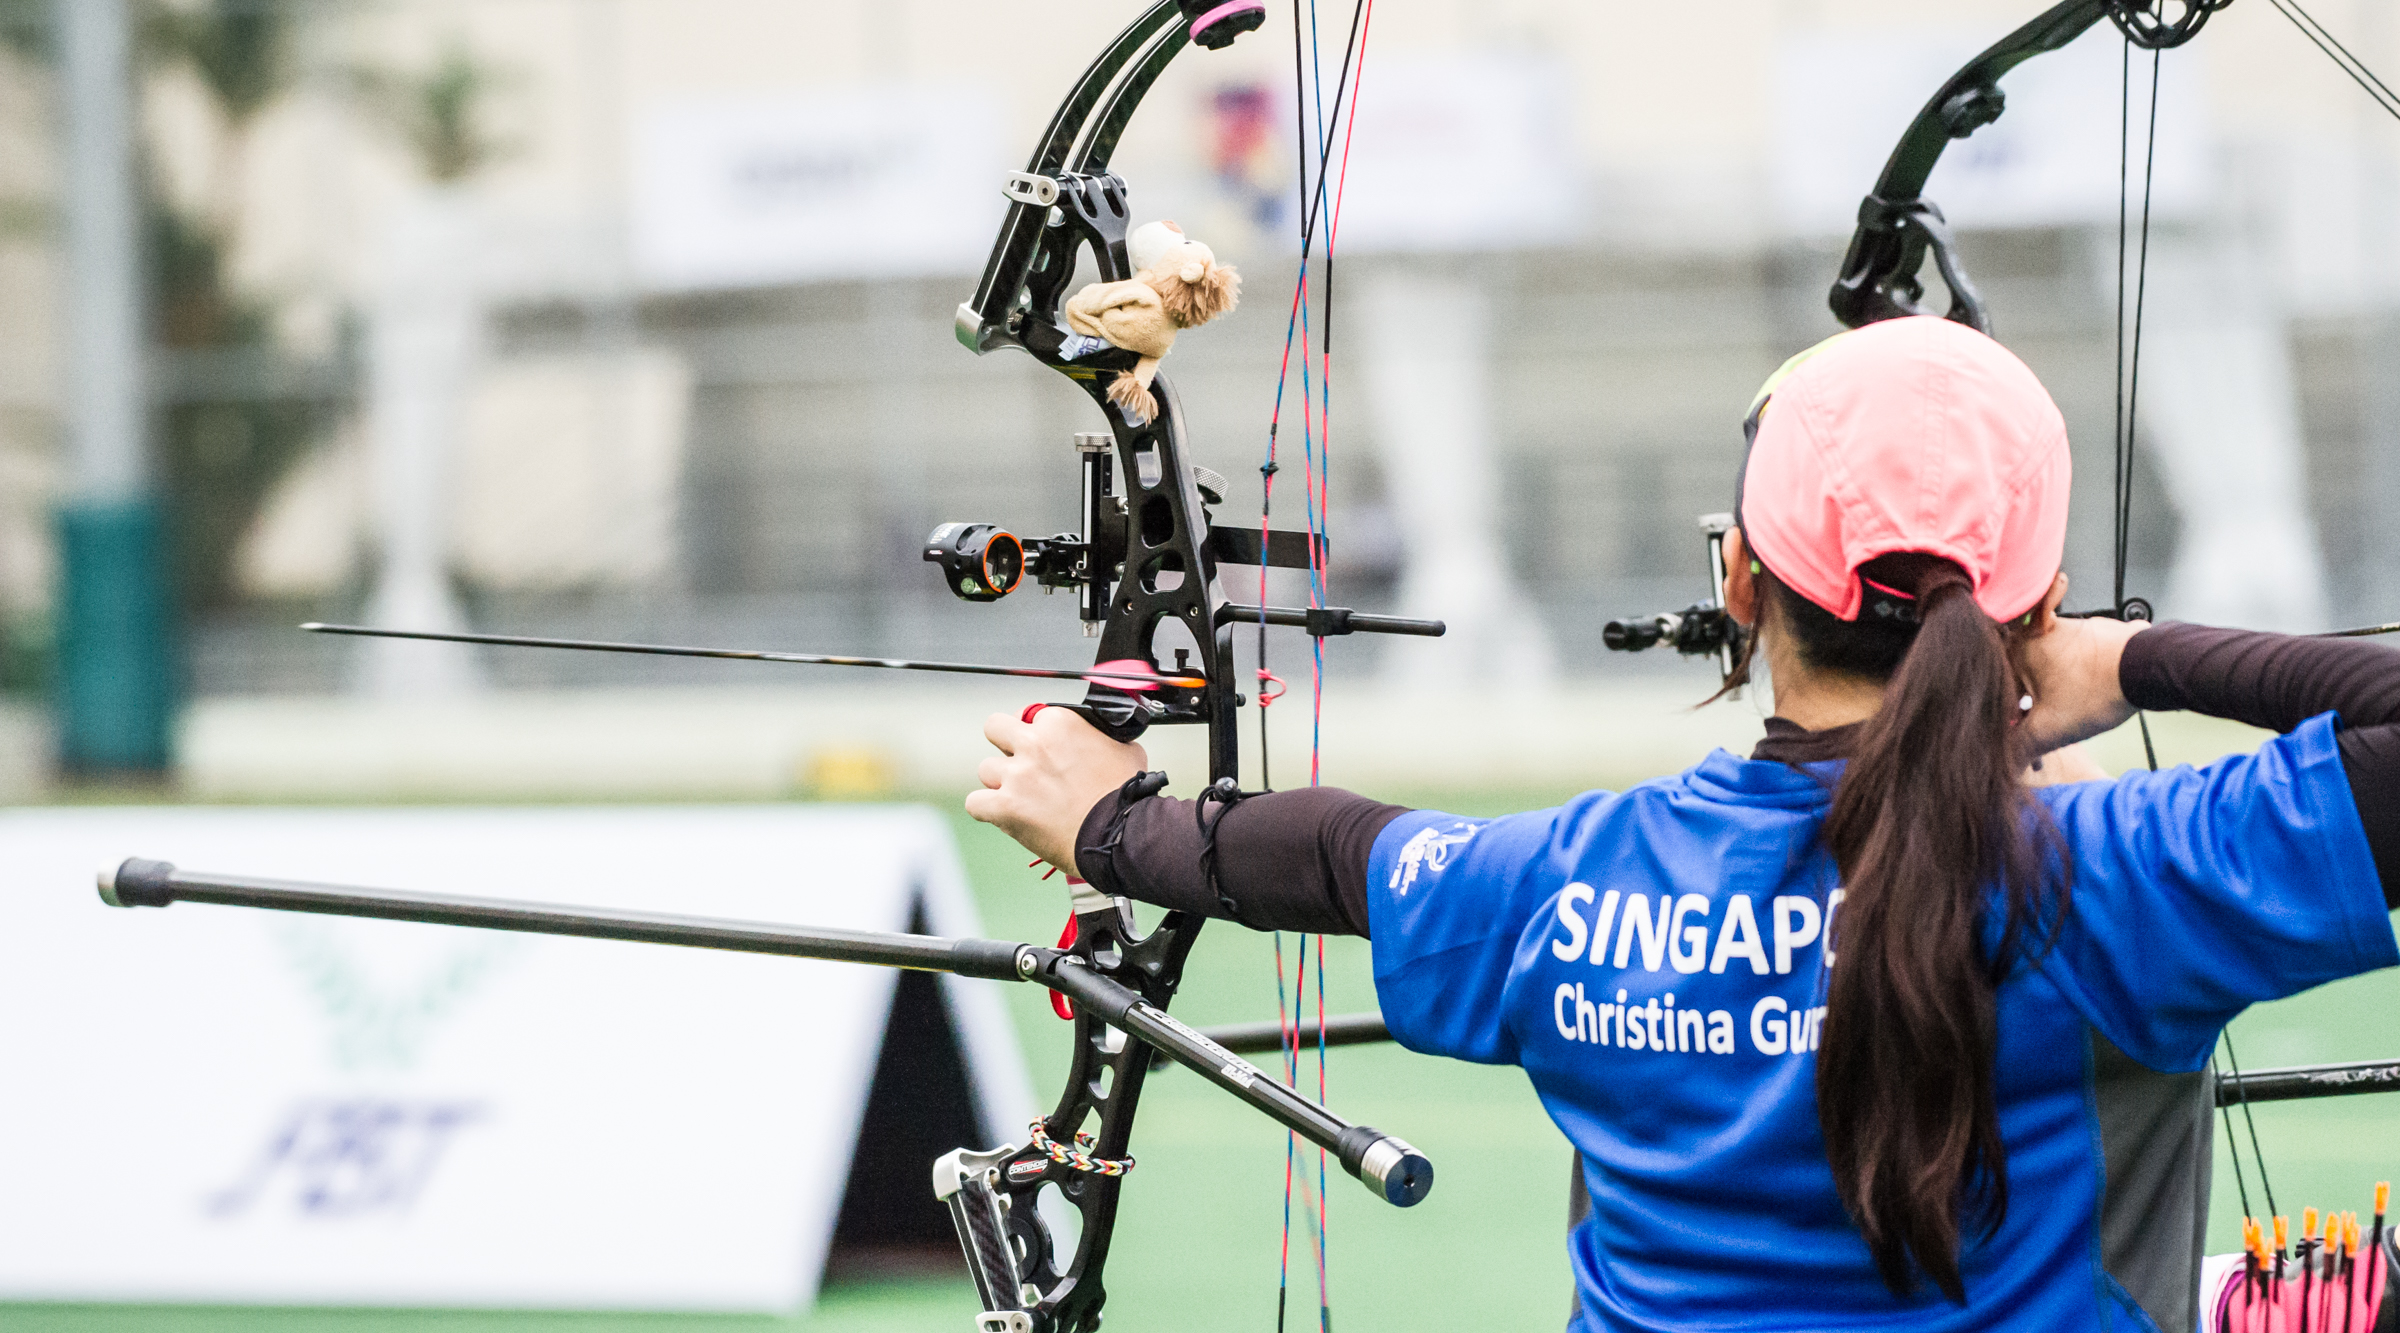 An arrow leaves the bow or an archer during the archery competition of the ASEAN University Games at the National Institute of Education.